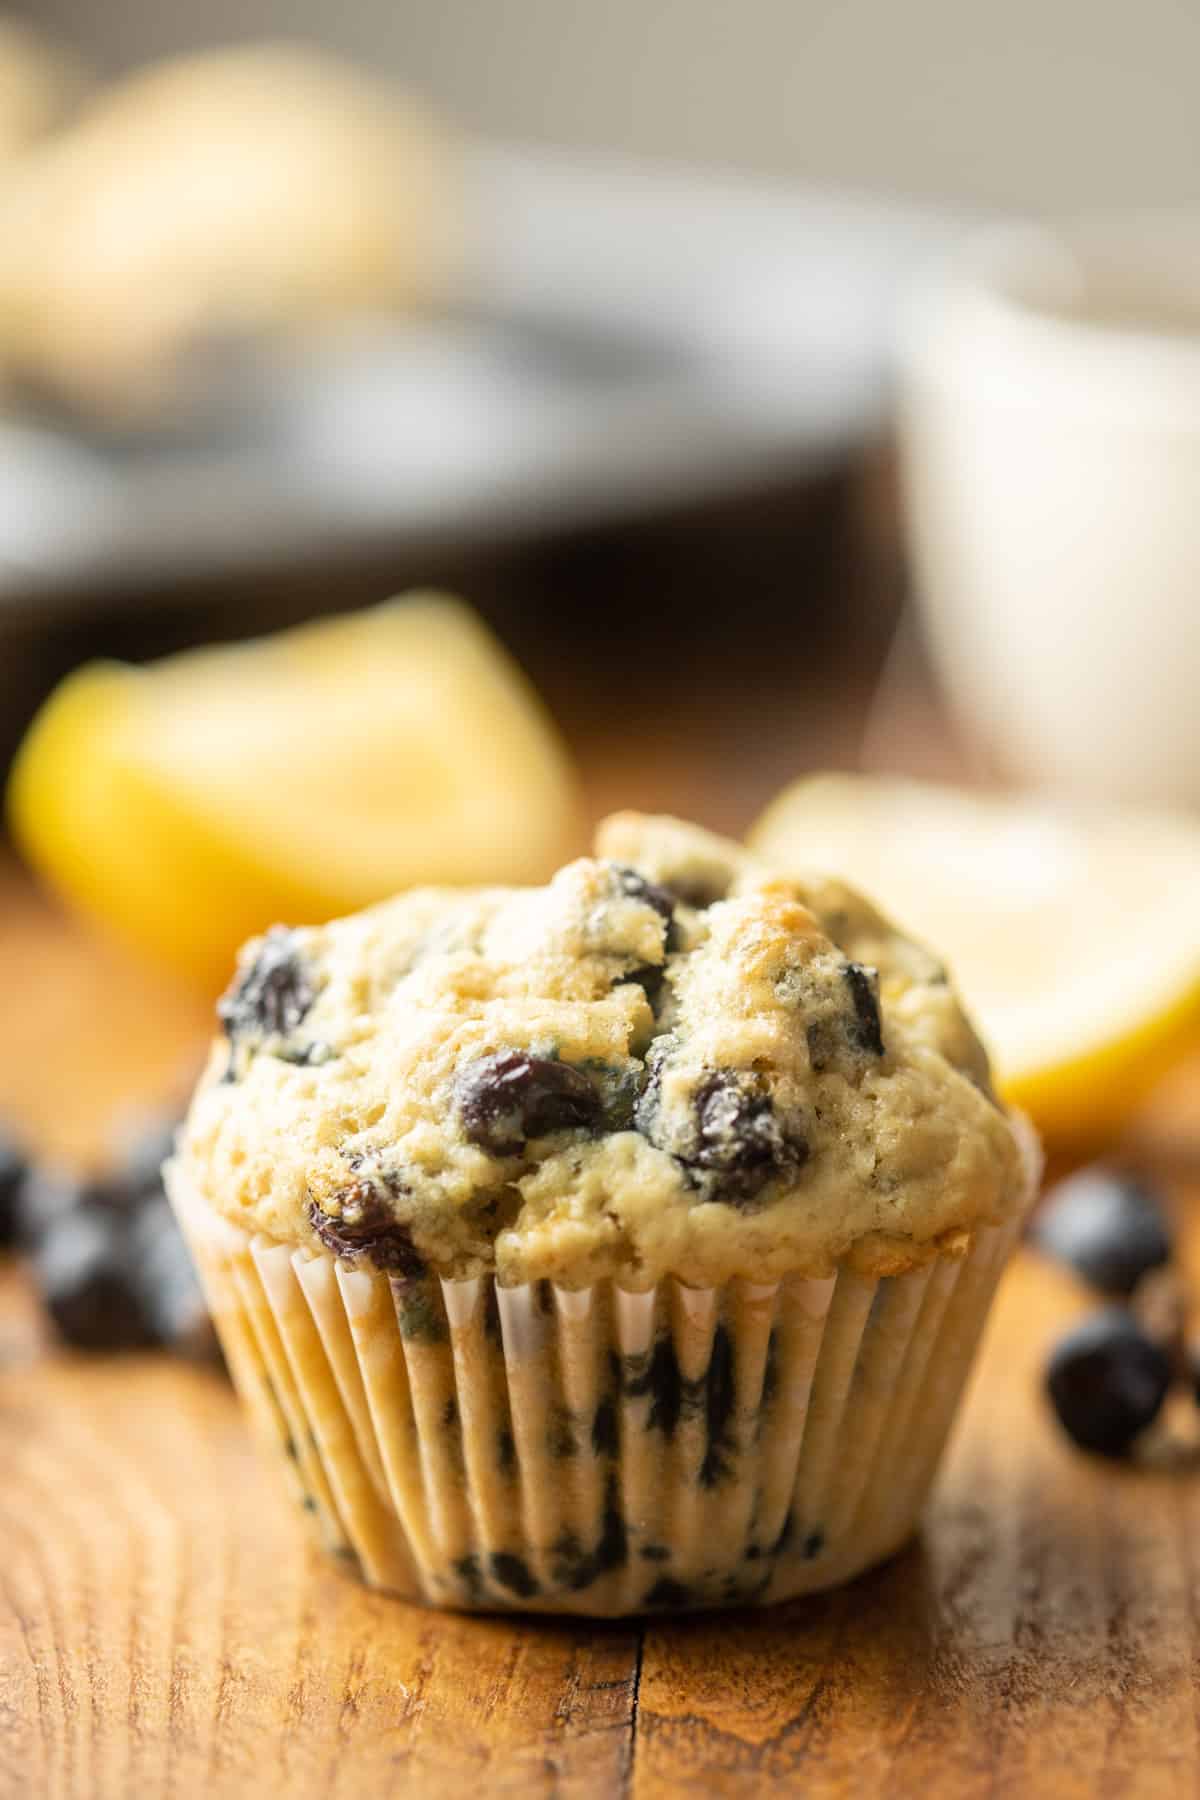 Vegan Blueberry Muffin with muffin tin, tea cup, and lemon slices in the background.